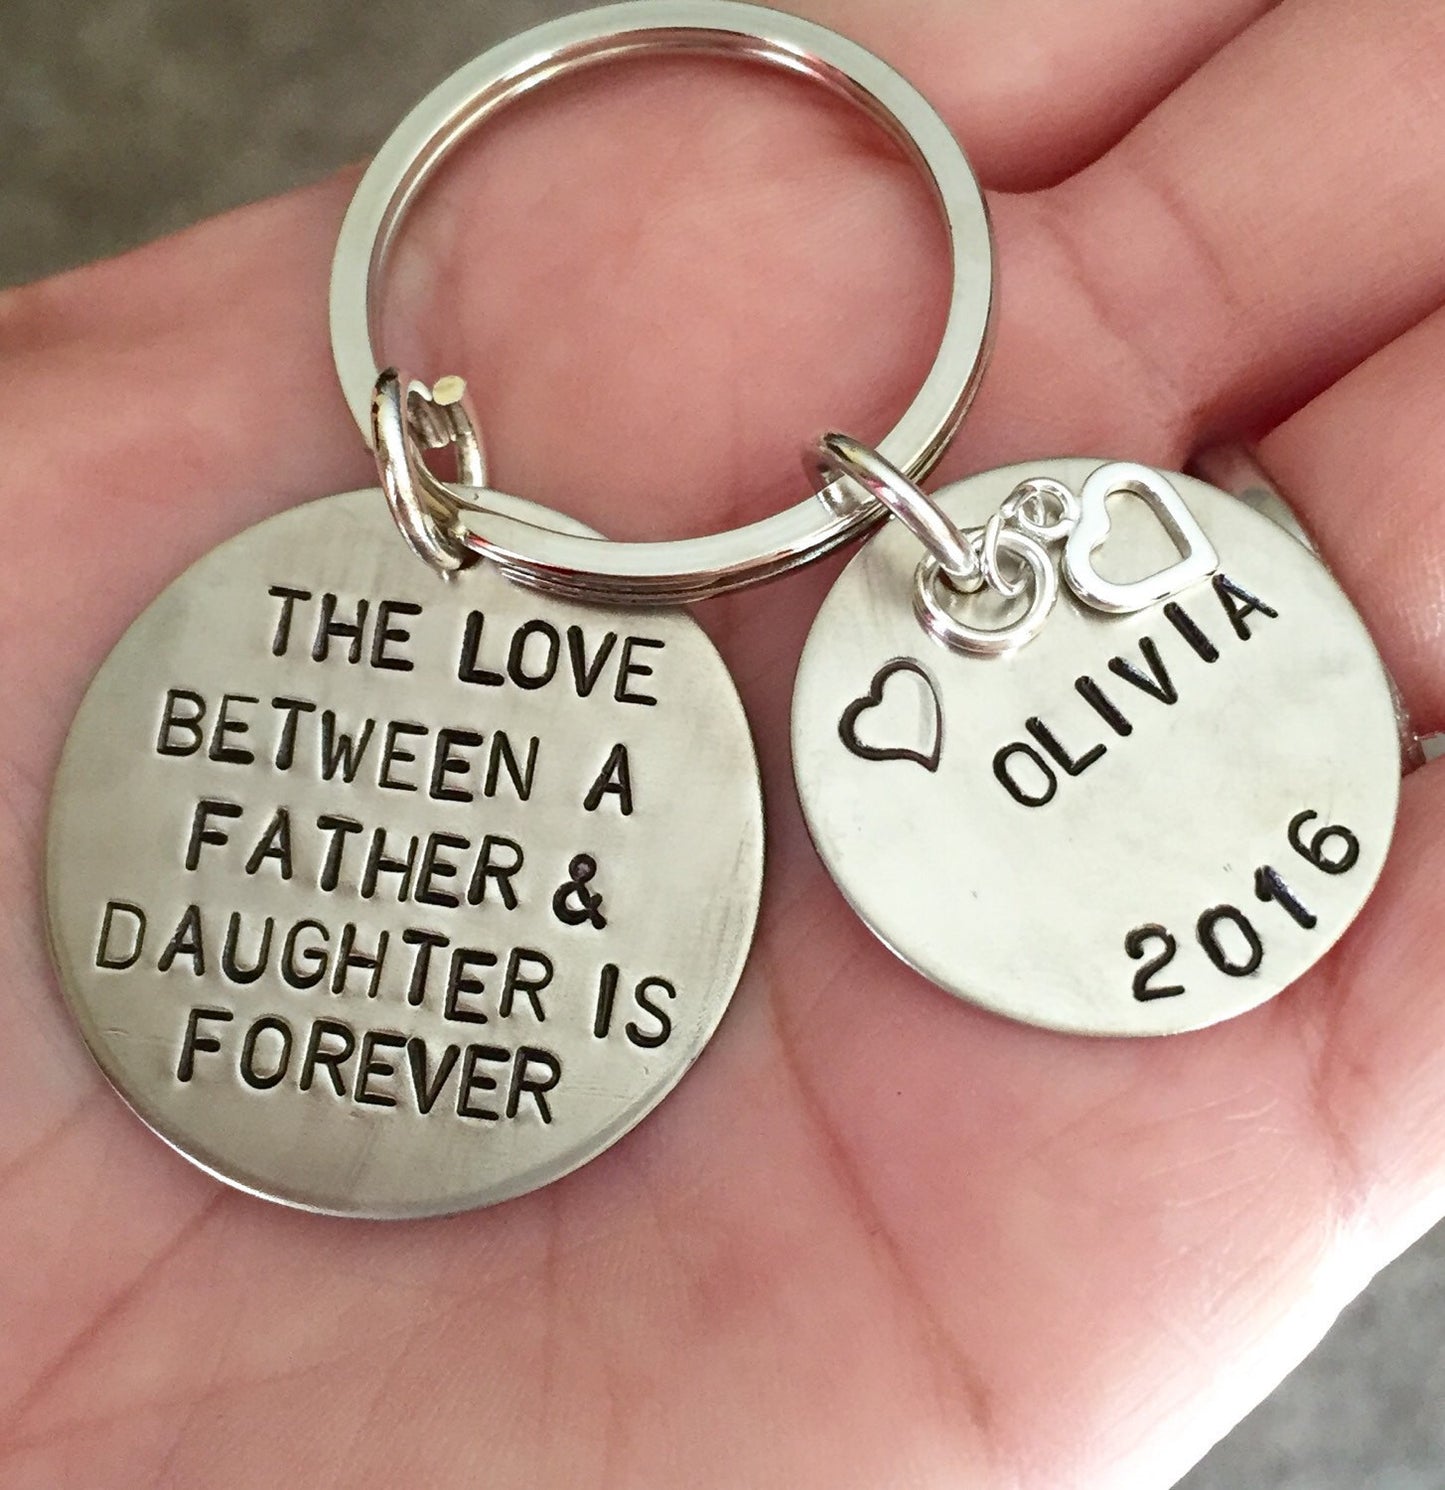 The Love Between A Father And Daughter Is Forever, Valentine Gift, Personalized Keychains, Hand Stamped Keychain, natashaaloha - Natashaaloha, jewelry, bracelets, necklace, keychains, fishing lures, gifts for men, charms, personalized, 